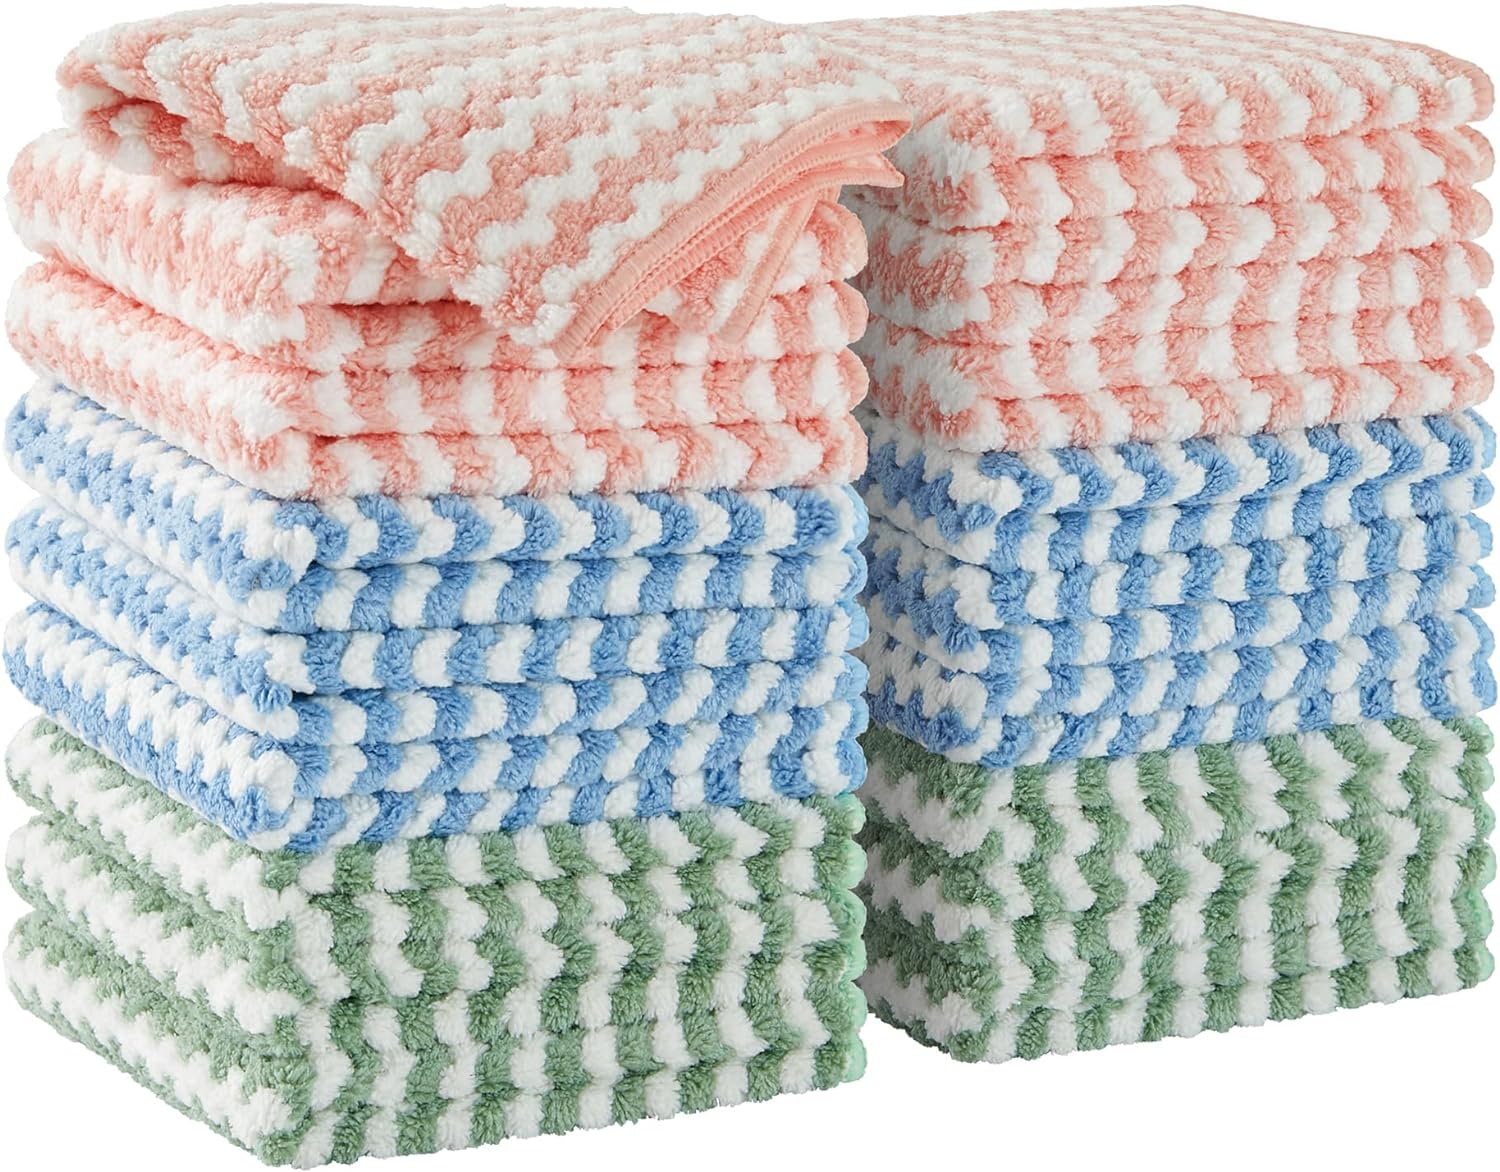 I love these dish cloths. I was looking for a dish cloth to replace a sponge after reading about the germs that sponges harbor. I tried a few different ones but was discouraged when I realized I was using alot more dish soap because the cloths swallowed the soap. I did not like that I couldn't see suds when washing my dishes. These dish cloths are great! They are extremely soft and manageable and the best size. Plus they produce soap suds! I use a fresh one every day and wash them in the washing